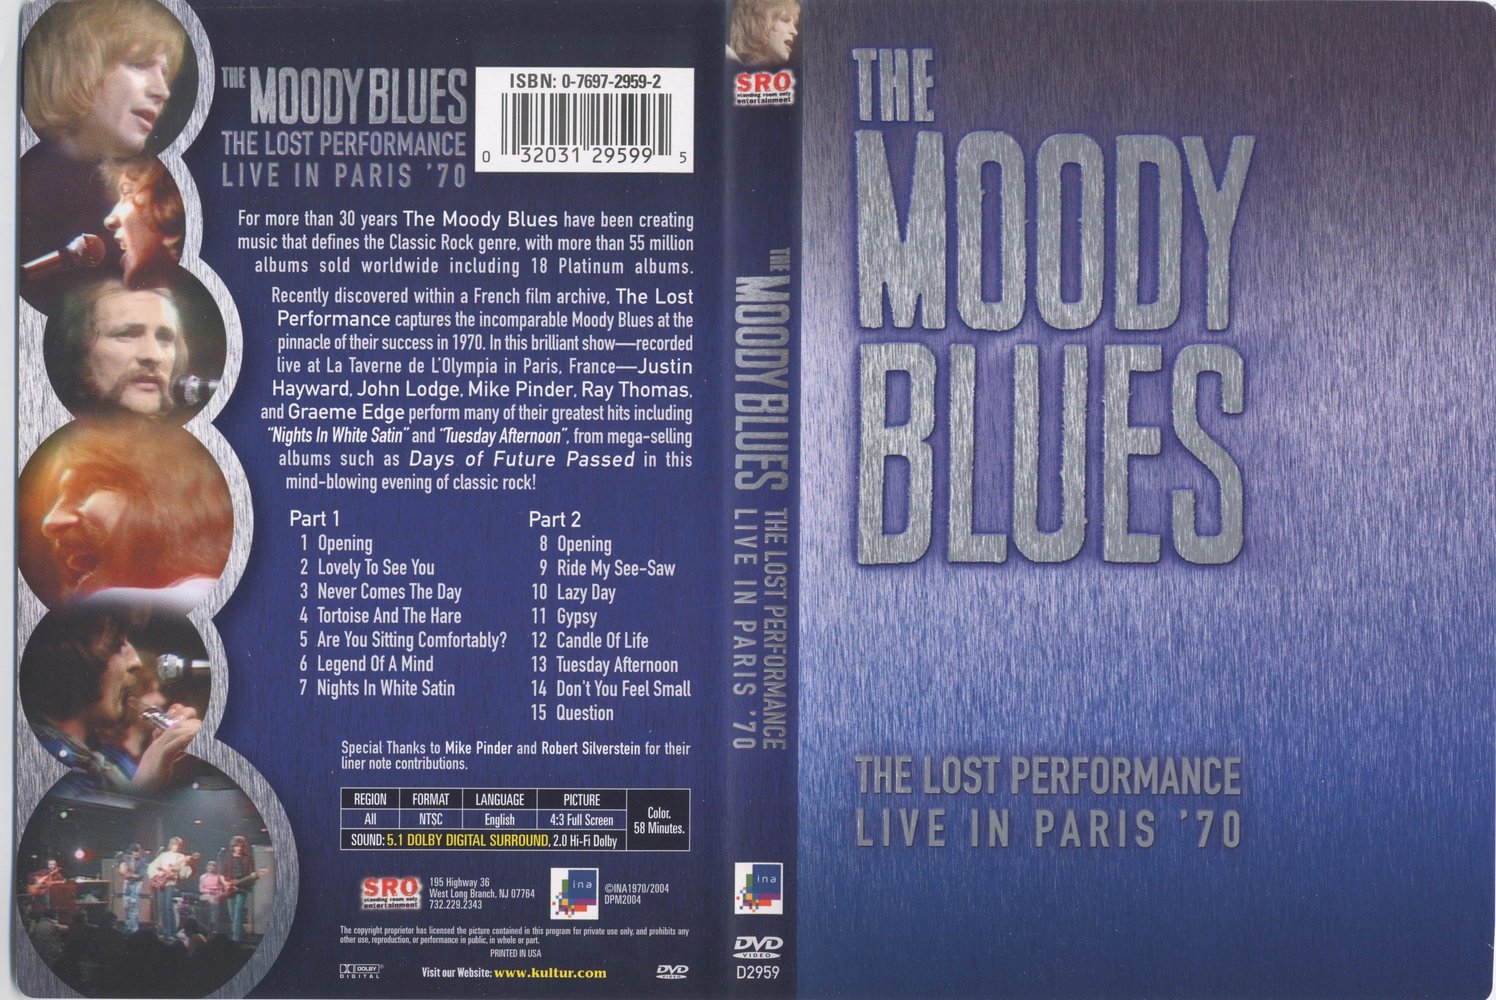 RockPeaks - The Moody Blues - The Lost Performance